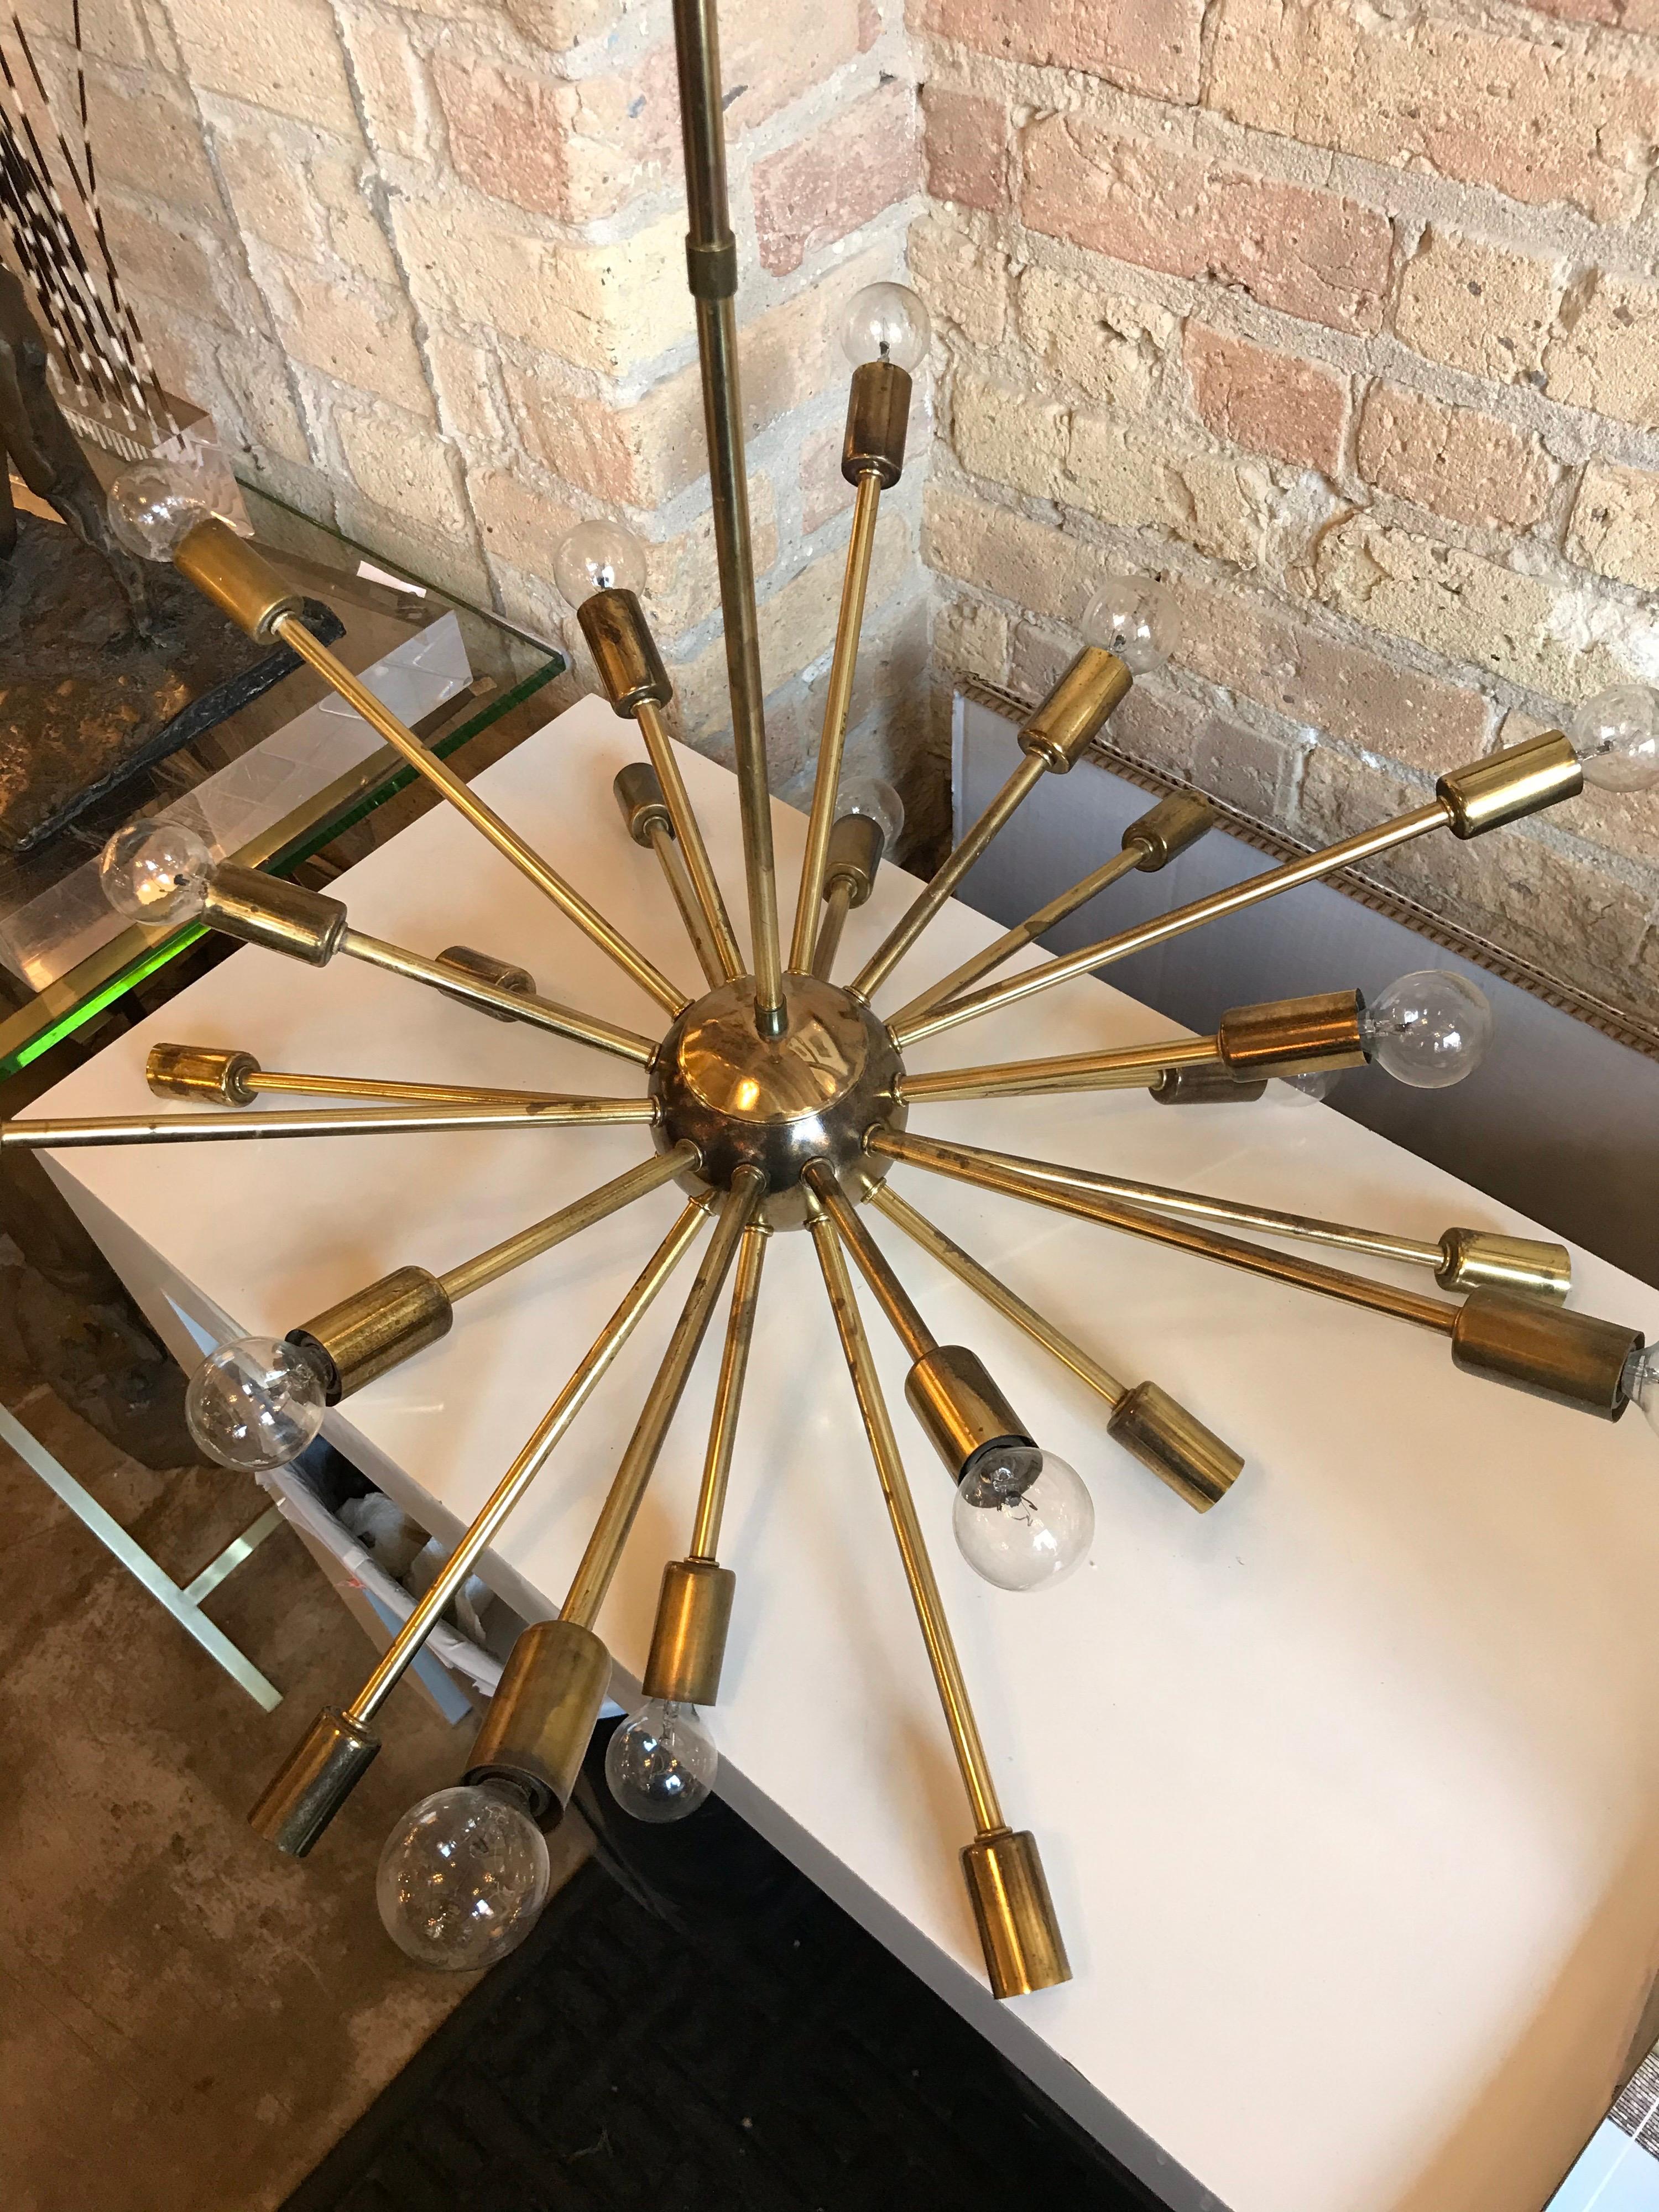 This is a vintage 24 arm brass Sputnik chandelier from the 1950s-1960s 
Has some tarnished areas but patina gives aged look. Has been required.